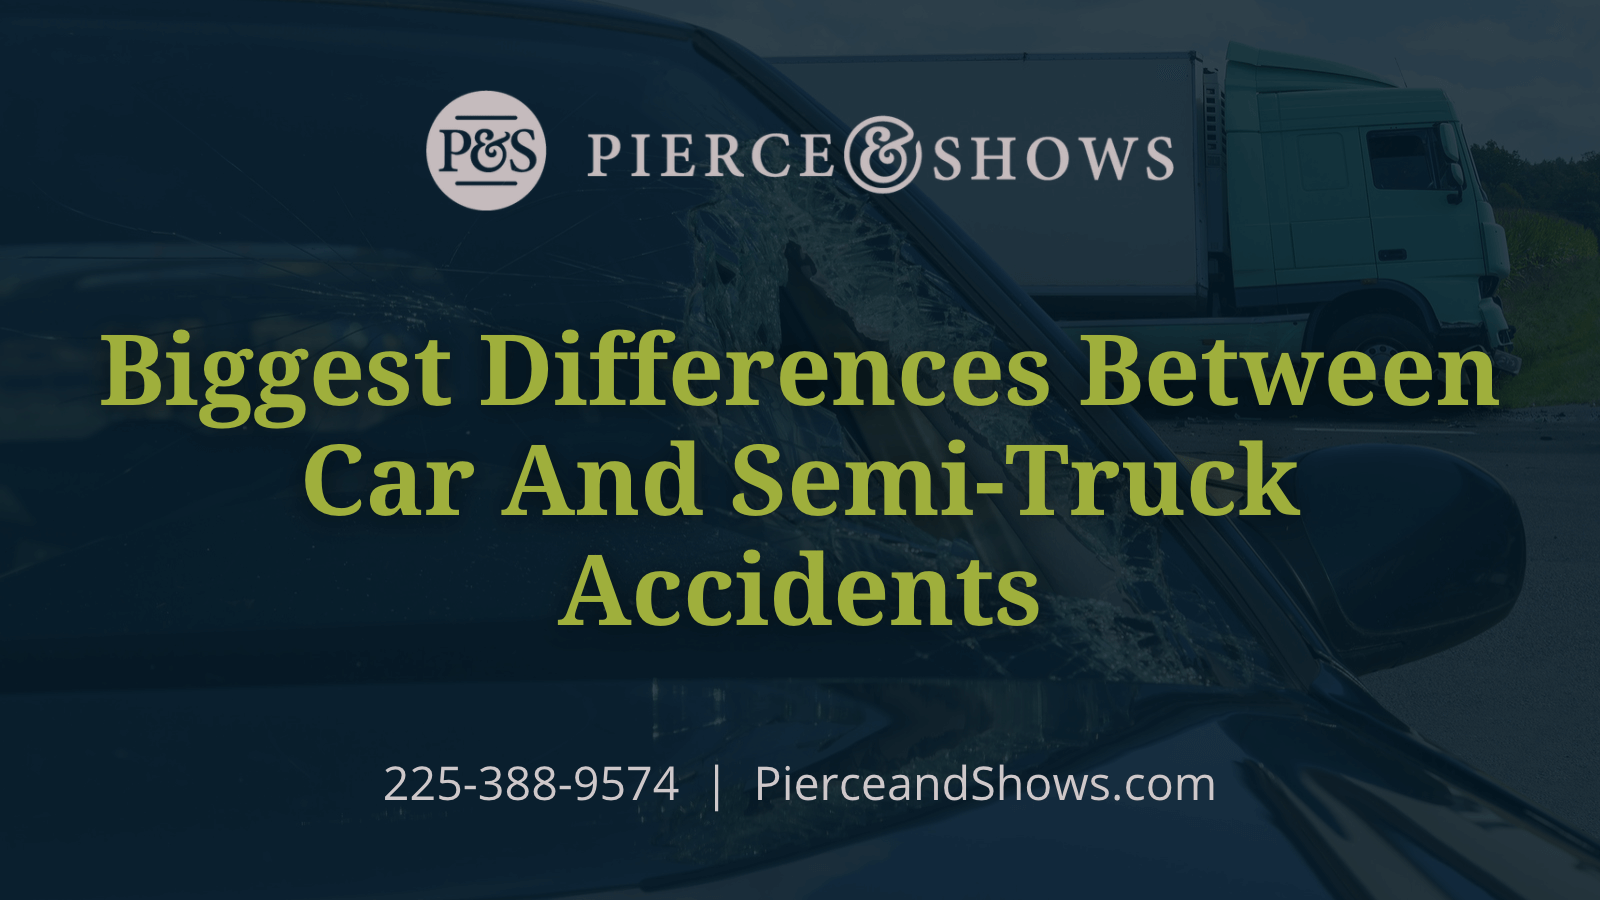 Biggest Differences Between Car And Semi-Truck Accidents - Baton Rouge Louisiana injury attorney Pierce & Shows